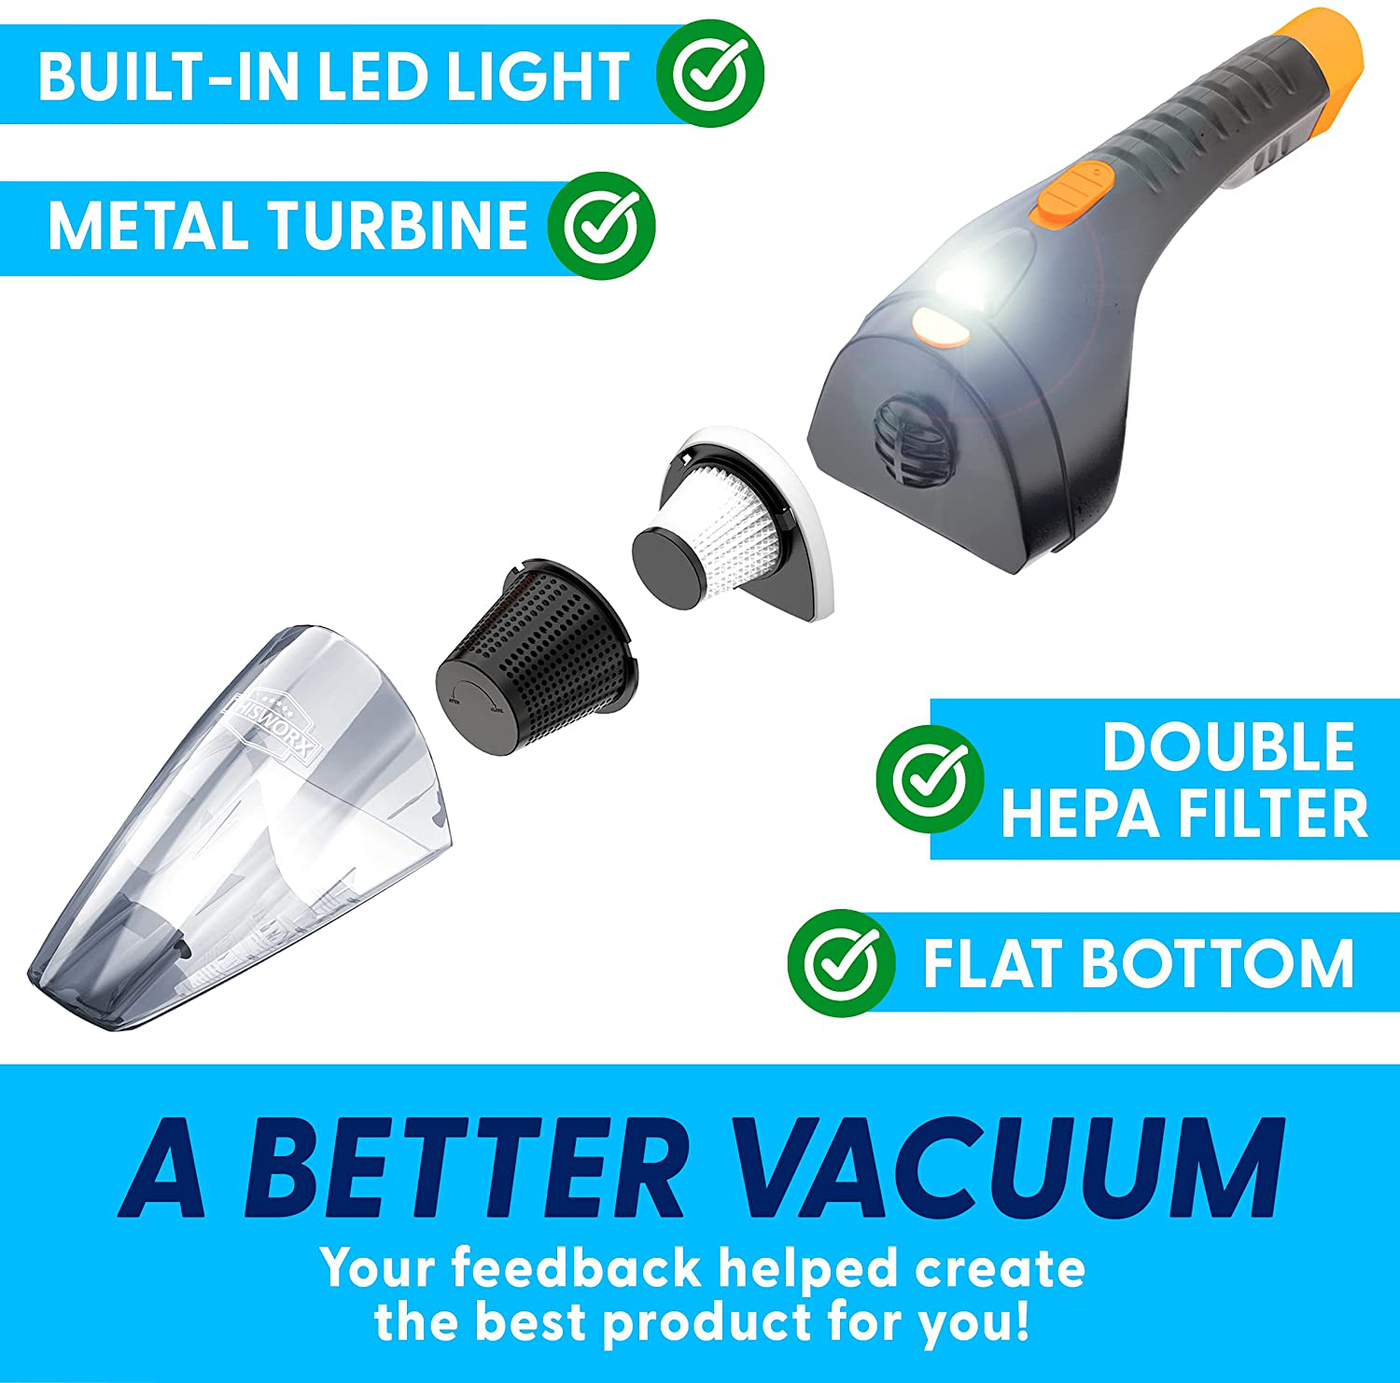 Portable Car Vacuum Cleaner: High Power Handheld Vacuum w/LED Light -110W 12v Best Car & Auto Accessories Kit for Detailing and Cleaning Car Interior - 16 Foot Cable